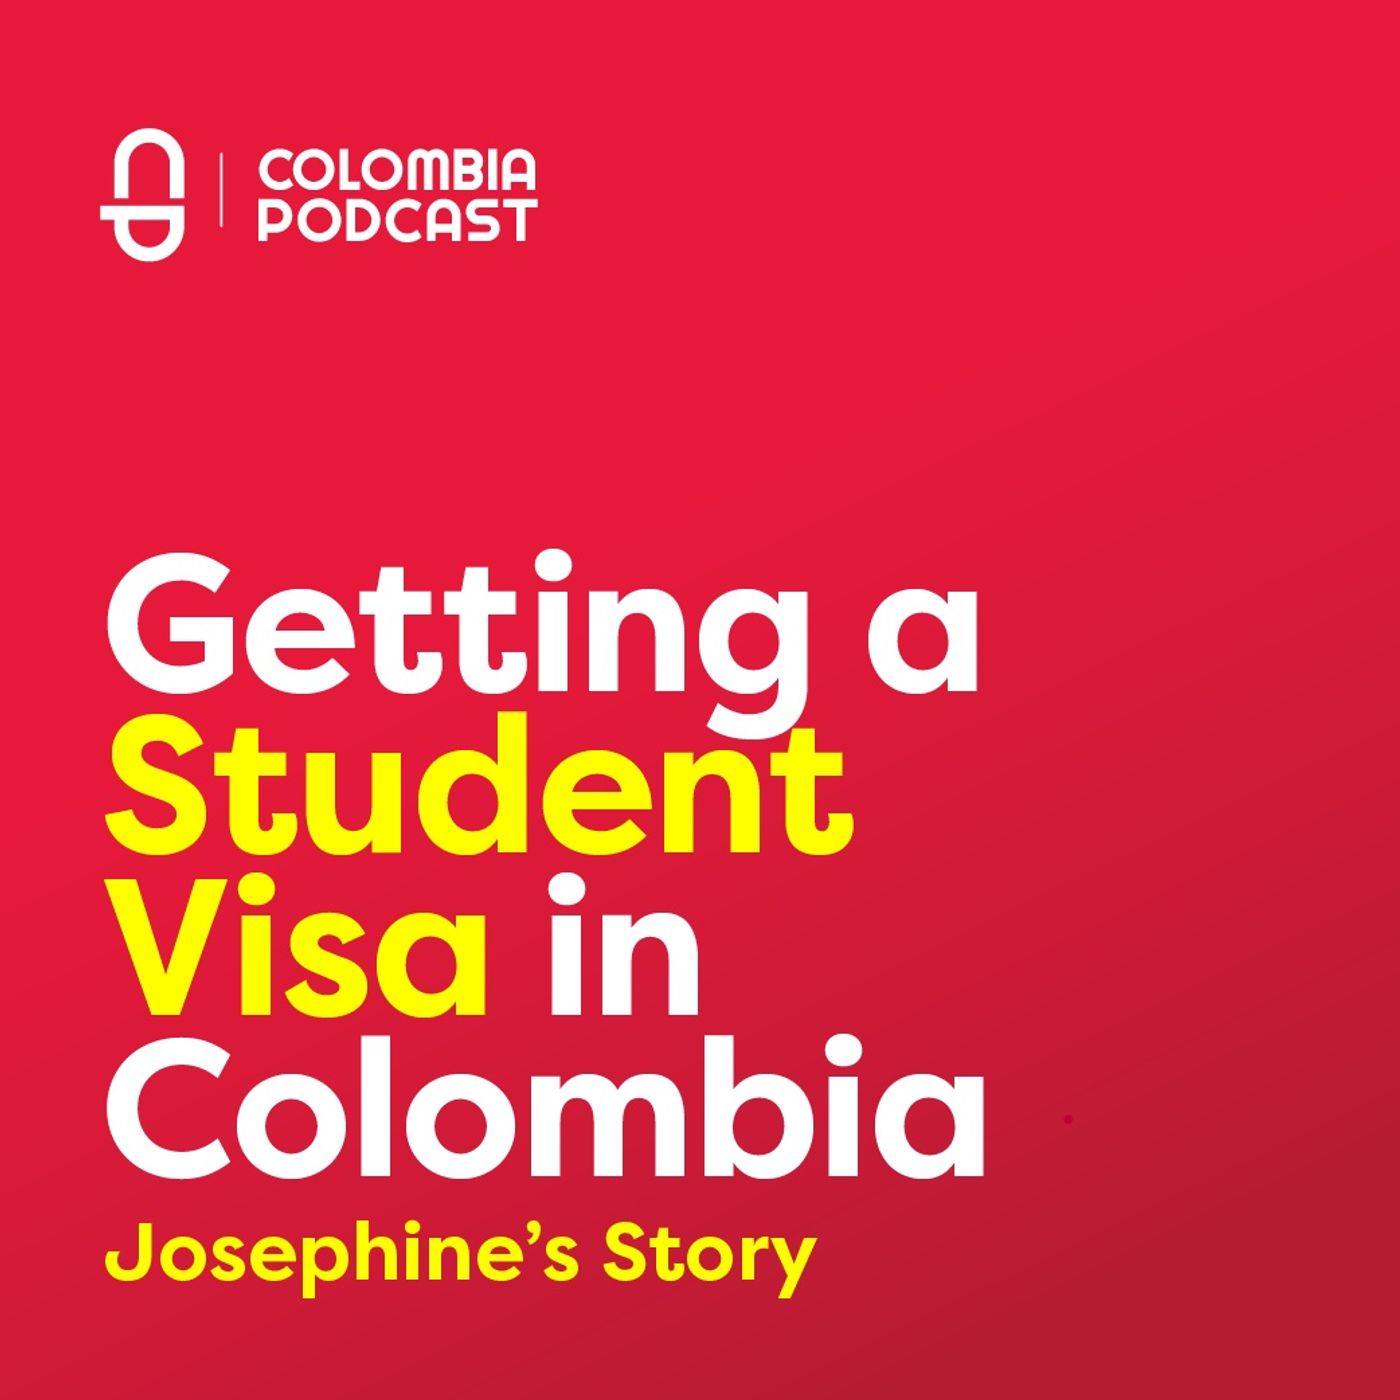 Getting a Student Visa in Colombia - Josephine's Story